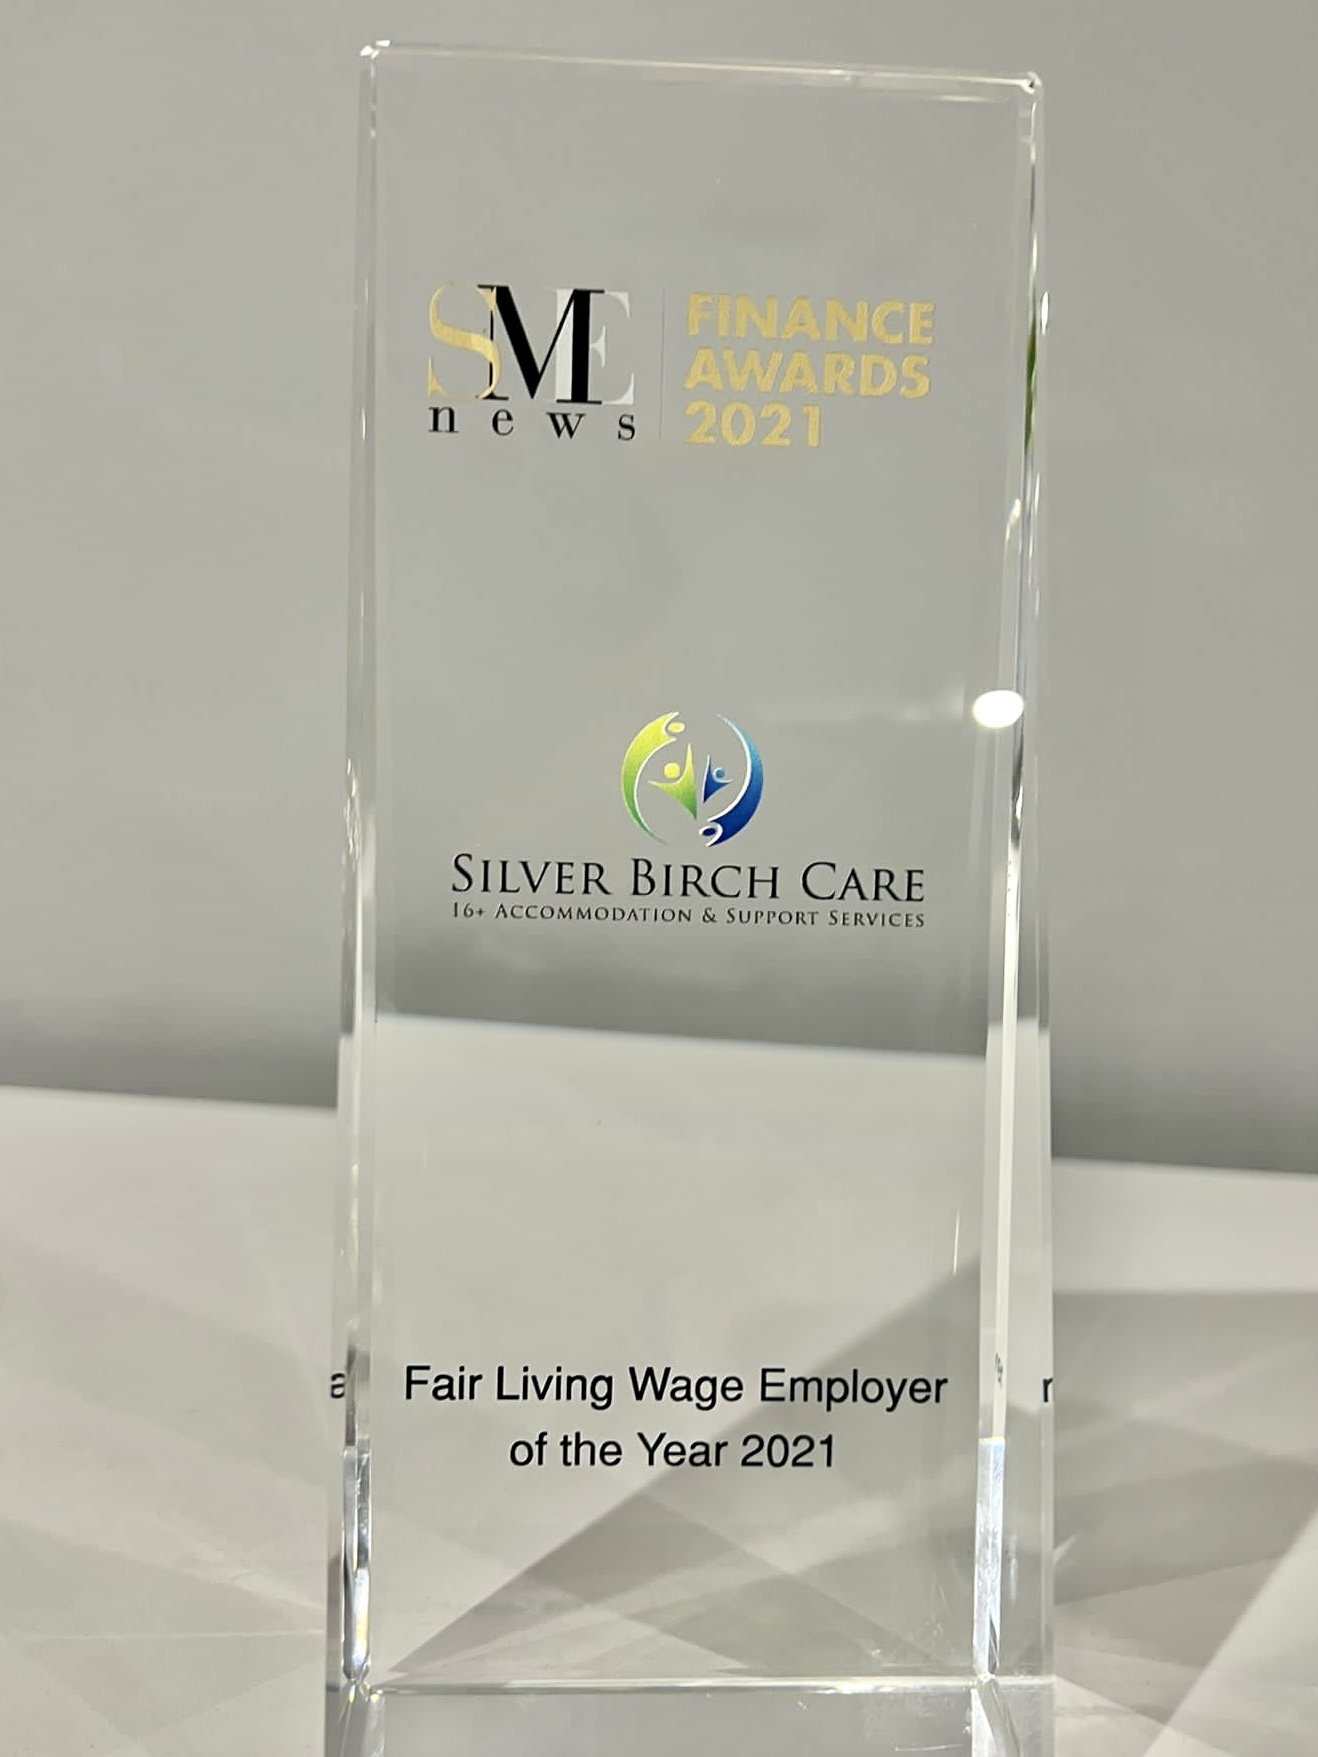 Fair Living Wage Employer Of The Year Award 2021 Trophy